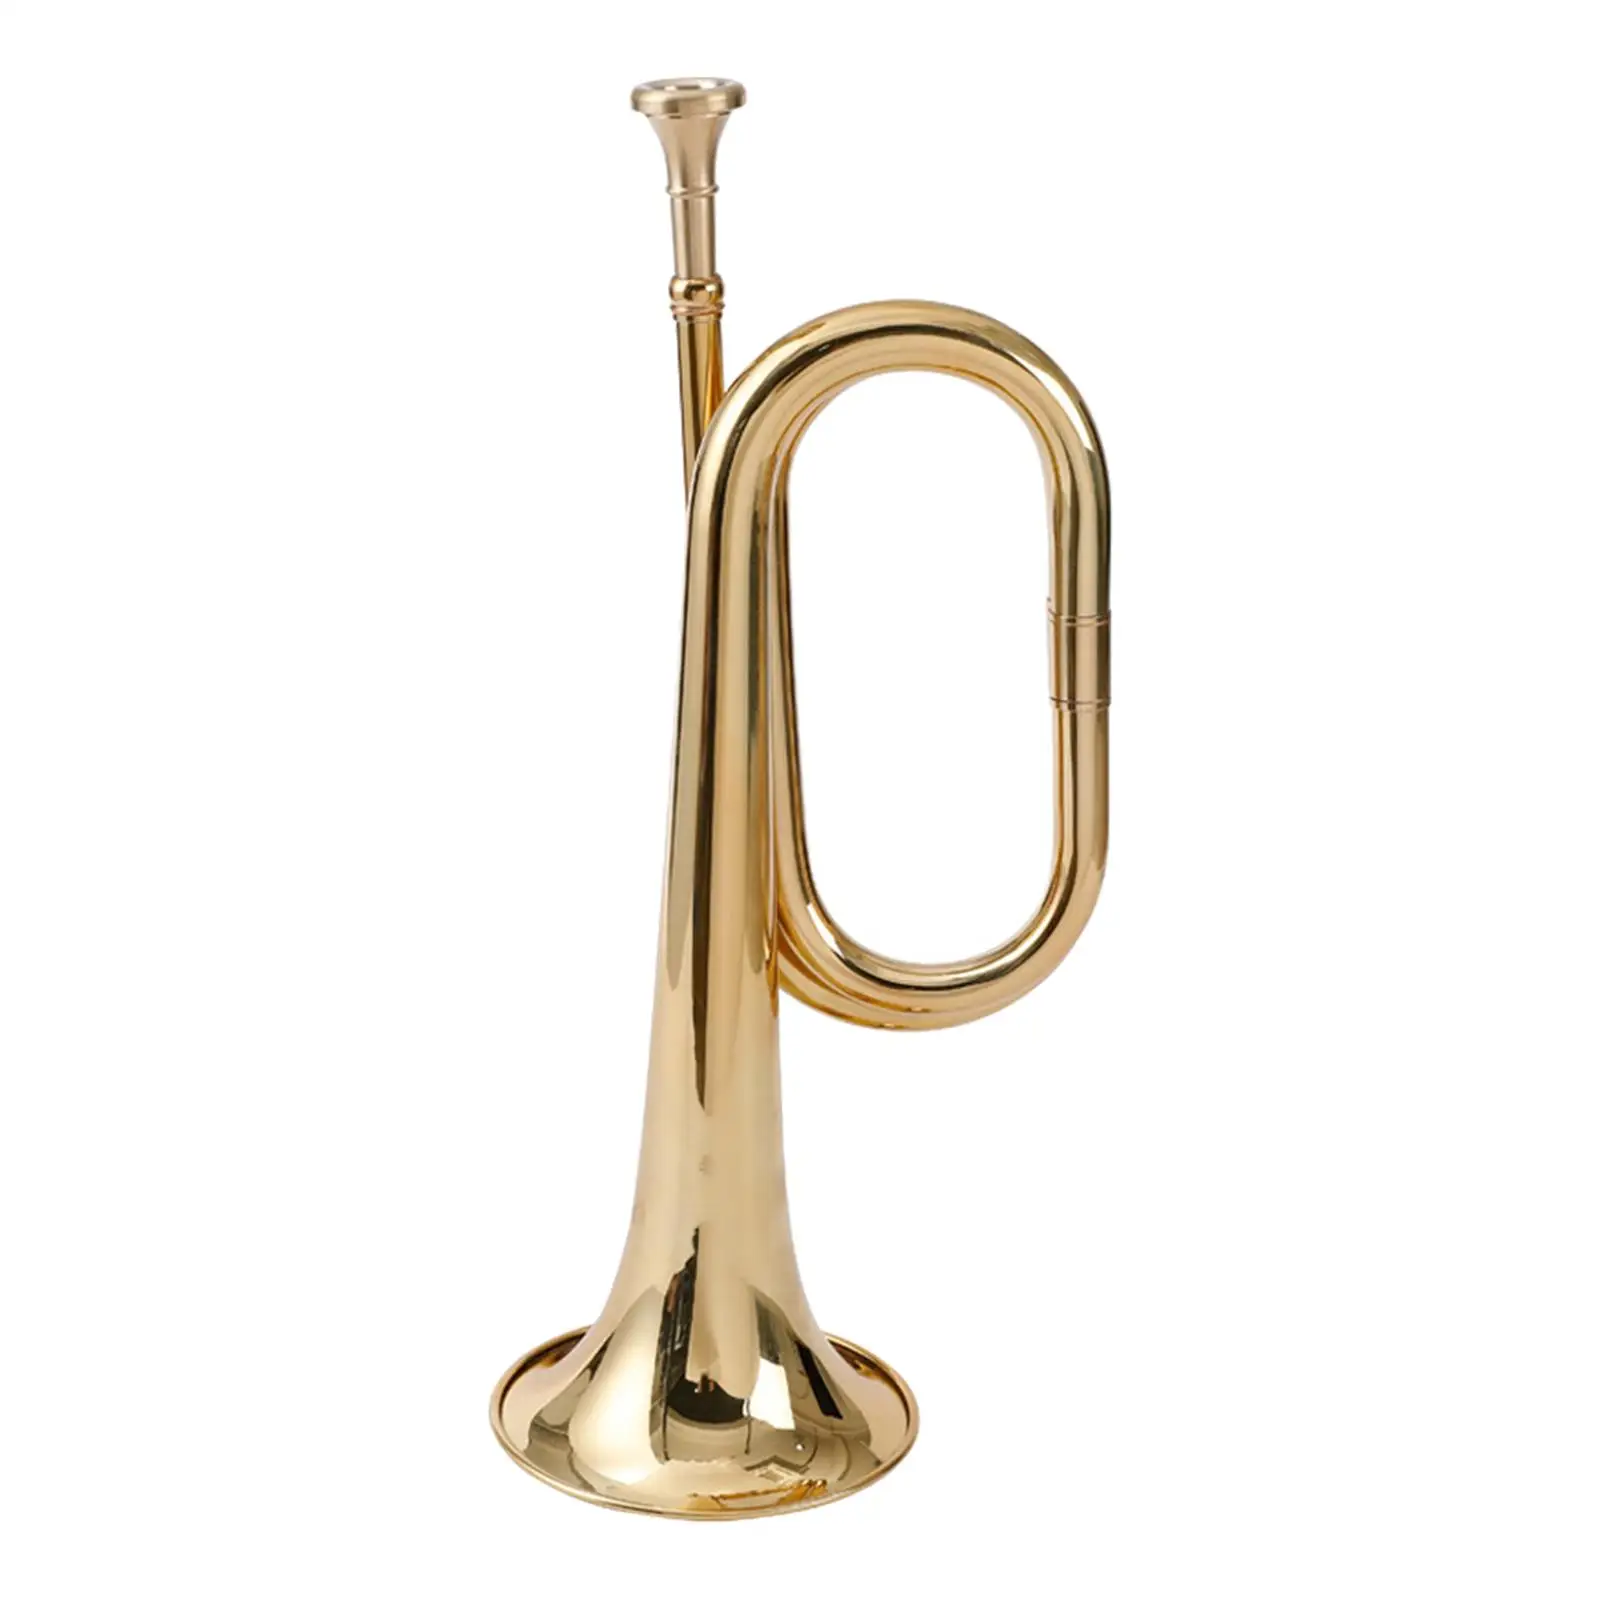 

BB Bugle Yellow Brass Orchestra Music Instrument Trumpet Cavalry for Musical Gifts Band Professional Children Parties